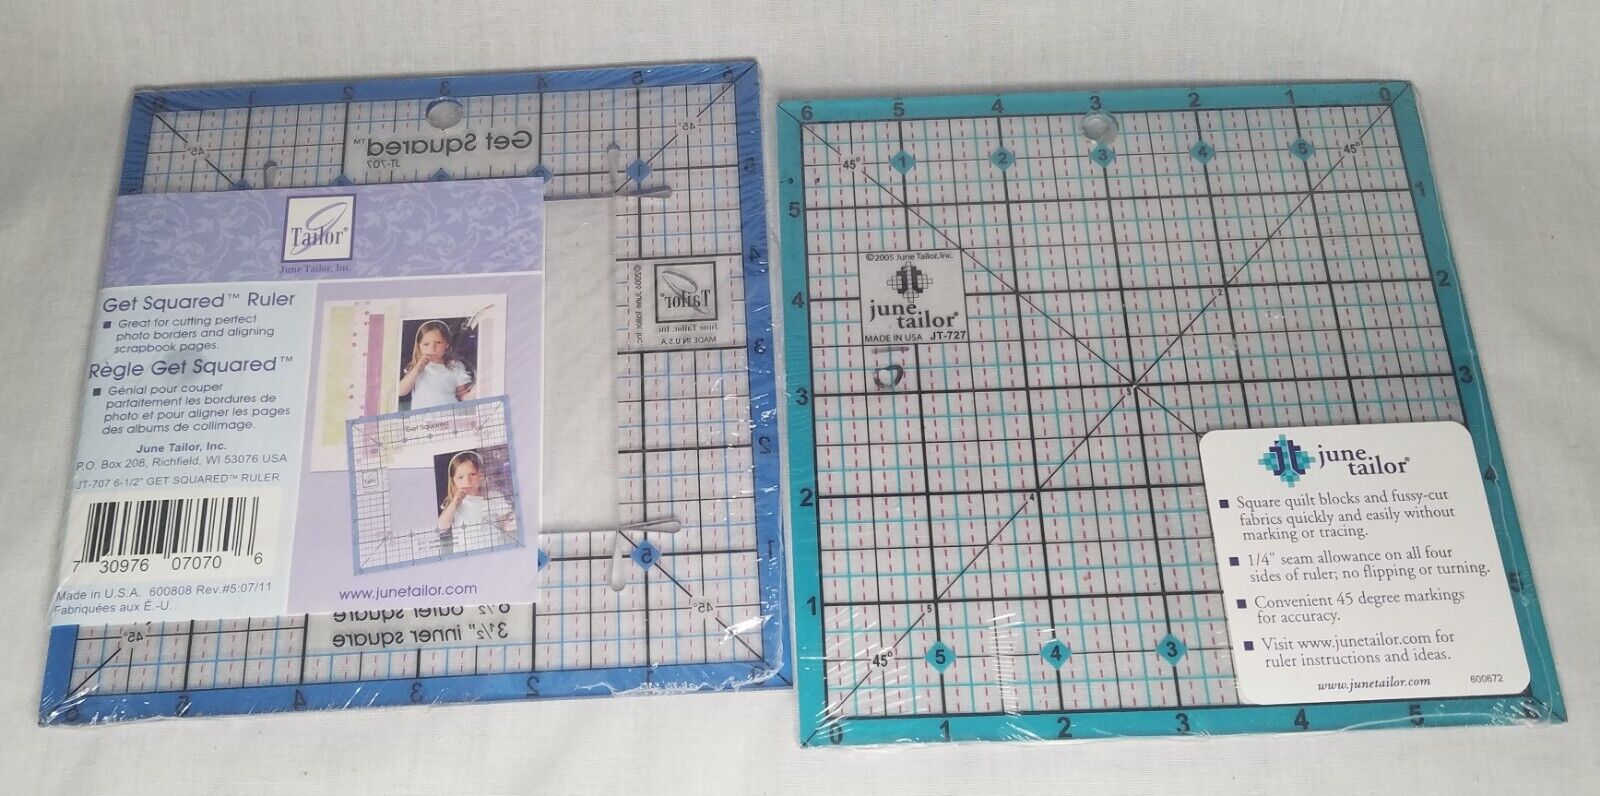 2 June Tailor Get Squared Rulers 8-1/2" Outer & 4-1/2" Inner & 6x6 Square ruler 